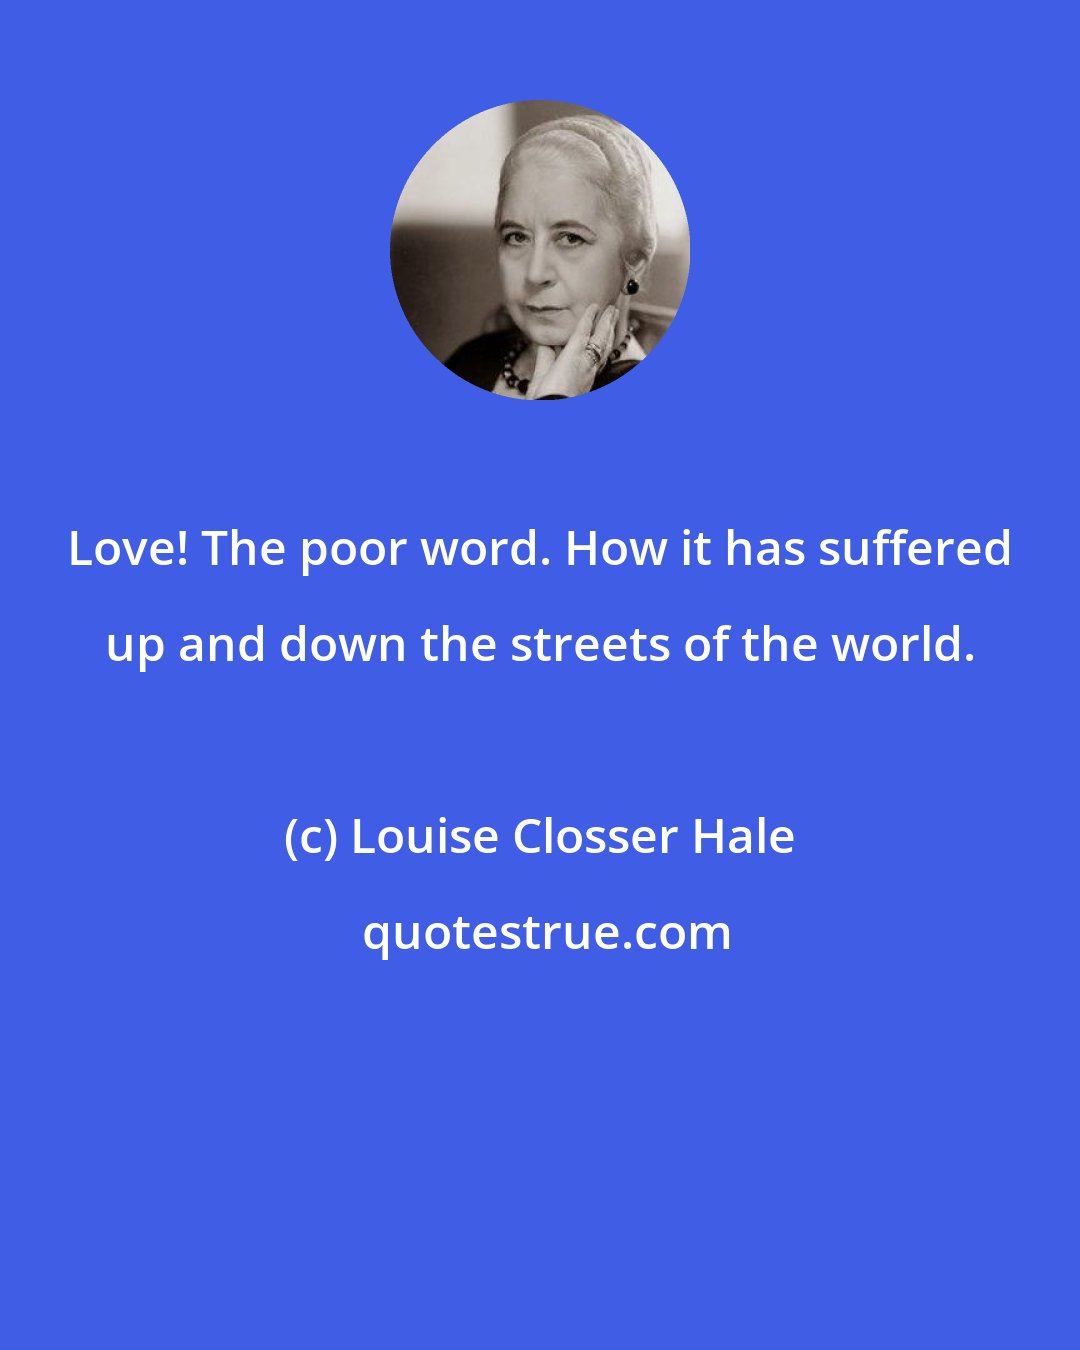 Louise Closser Hale: Love! The poor word. How it has suffered up and down the streets of the world.